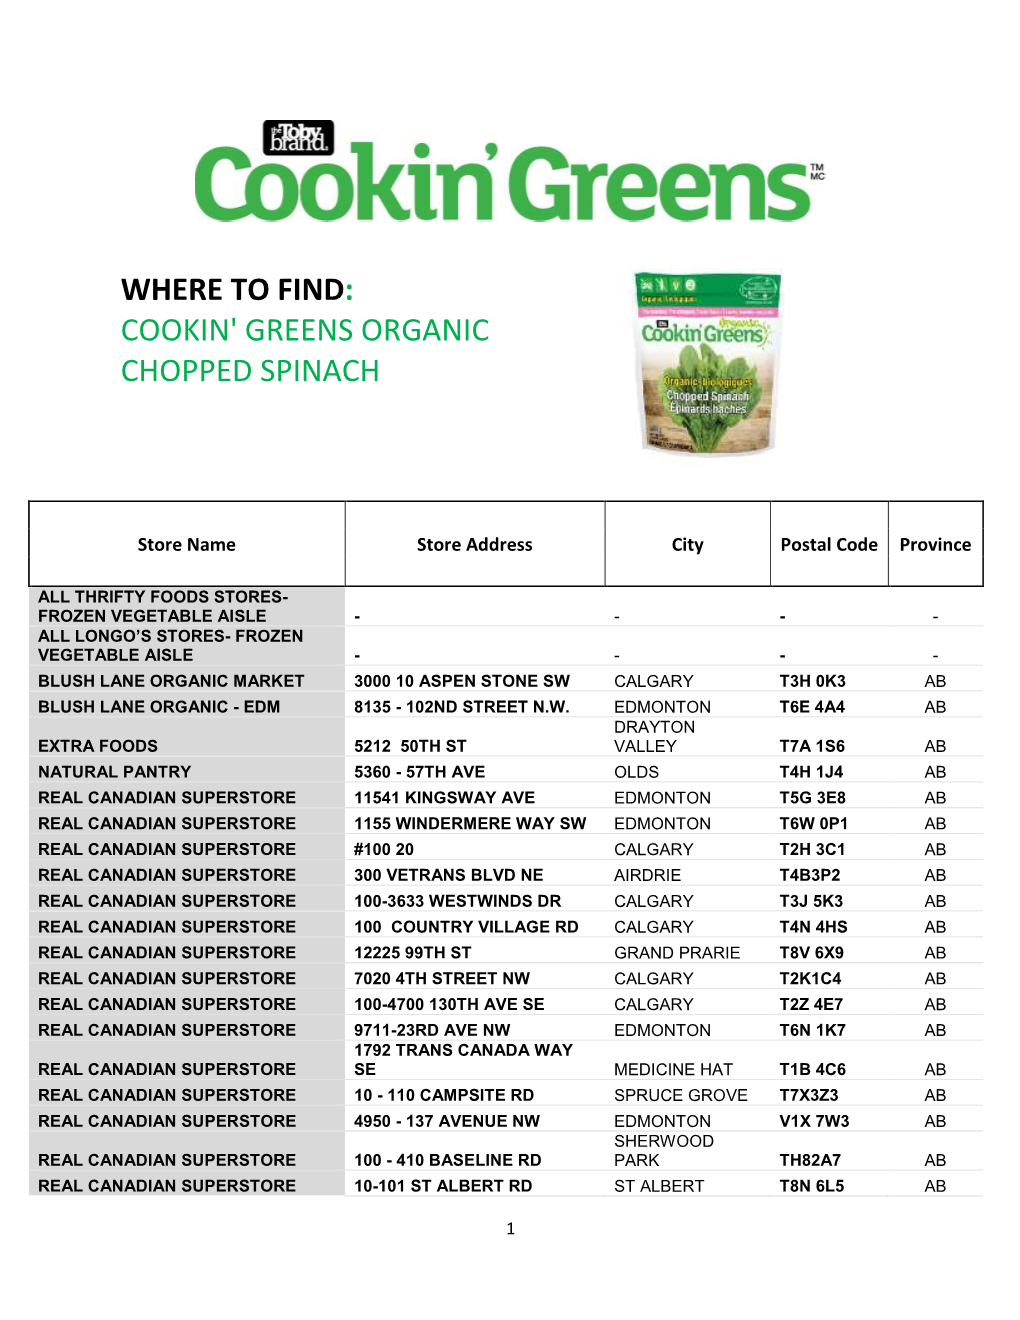 Where to Find: Cookin' Greens Organic Chopped Spinach